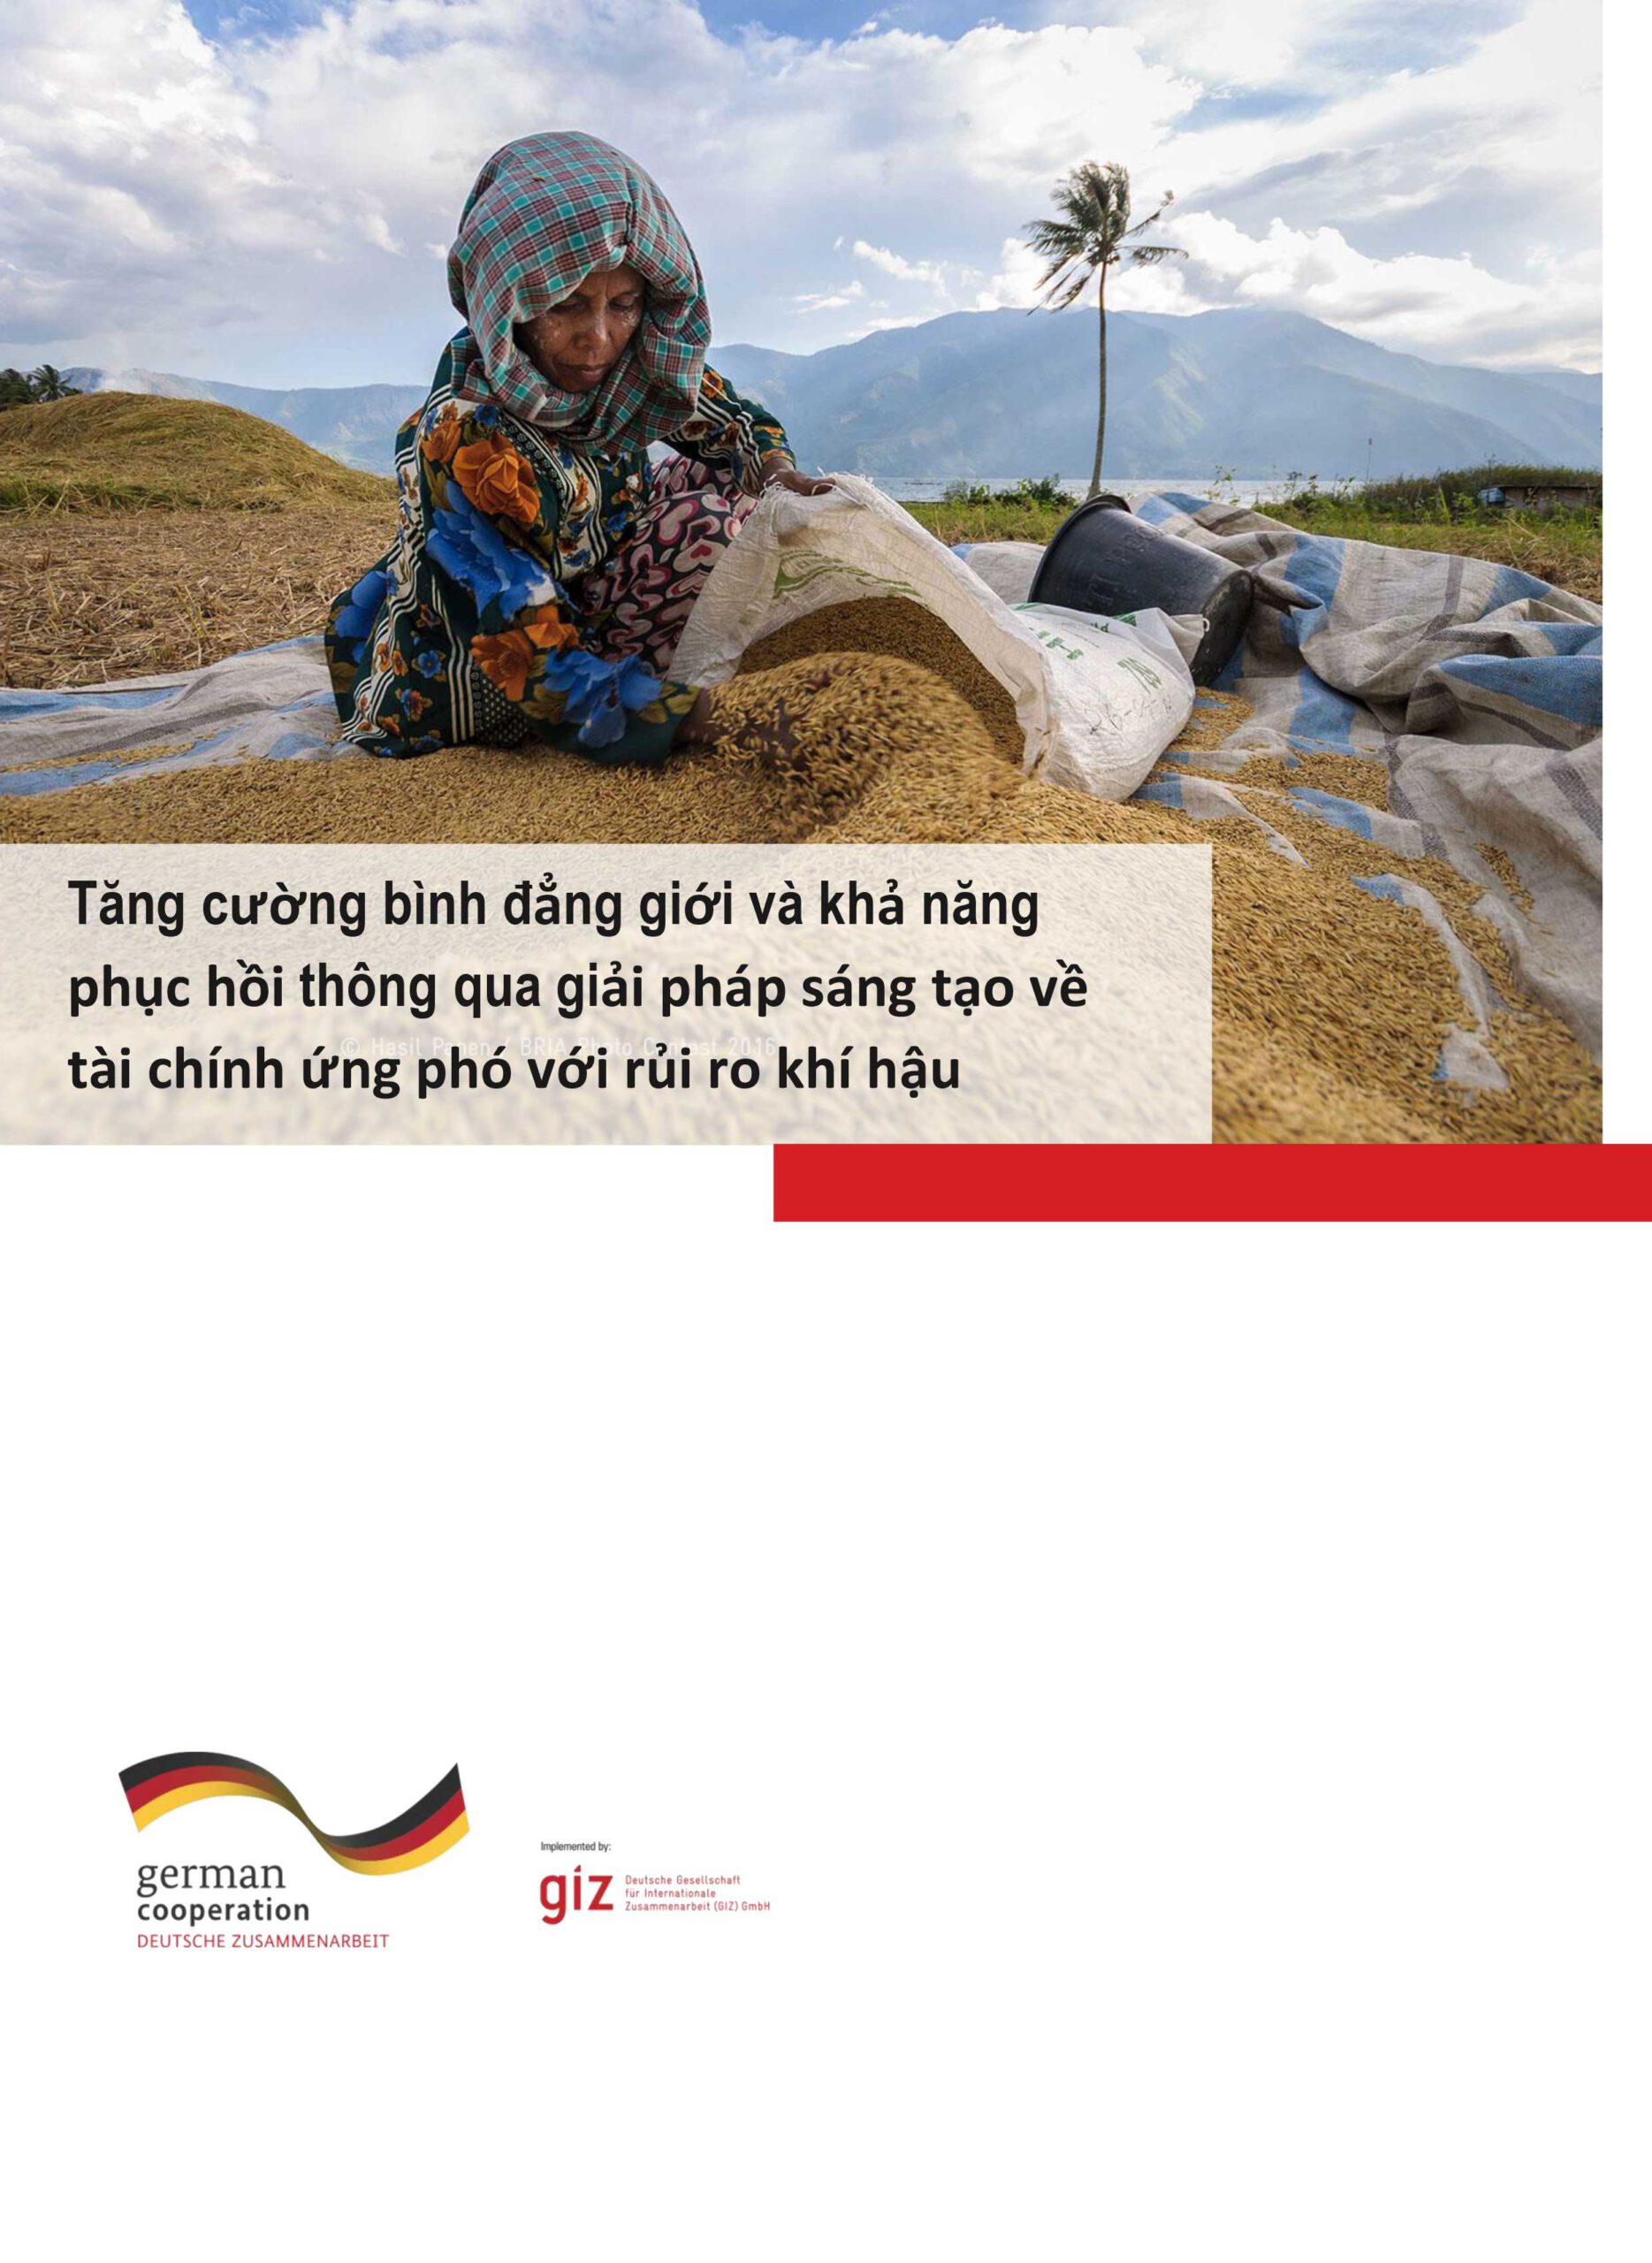 Strengthening gender equality and resilience through innovative climate-risk finance (VN)